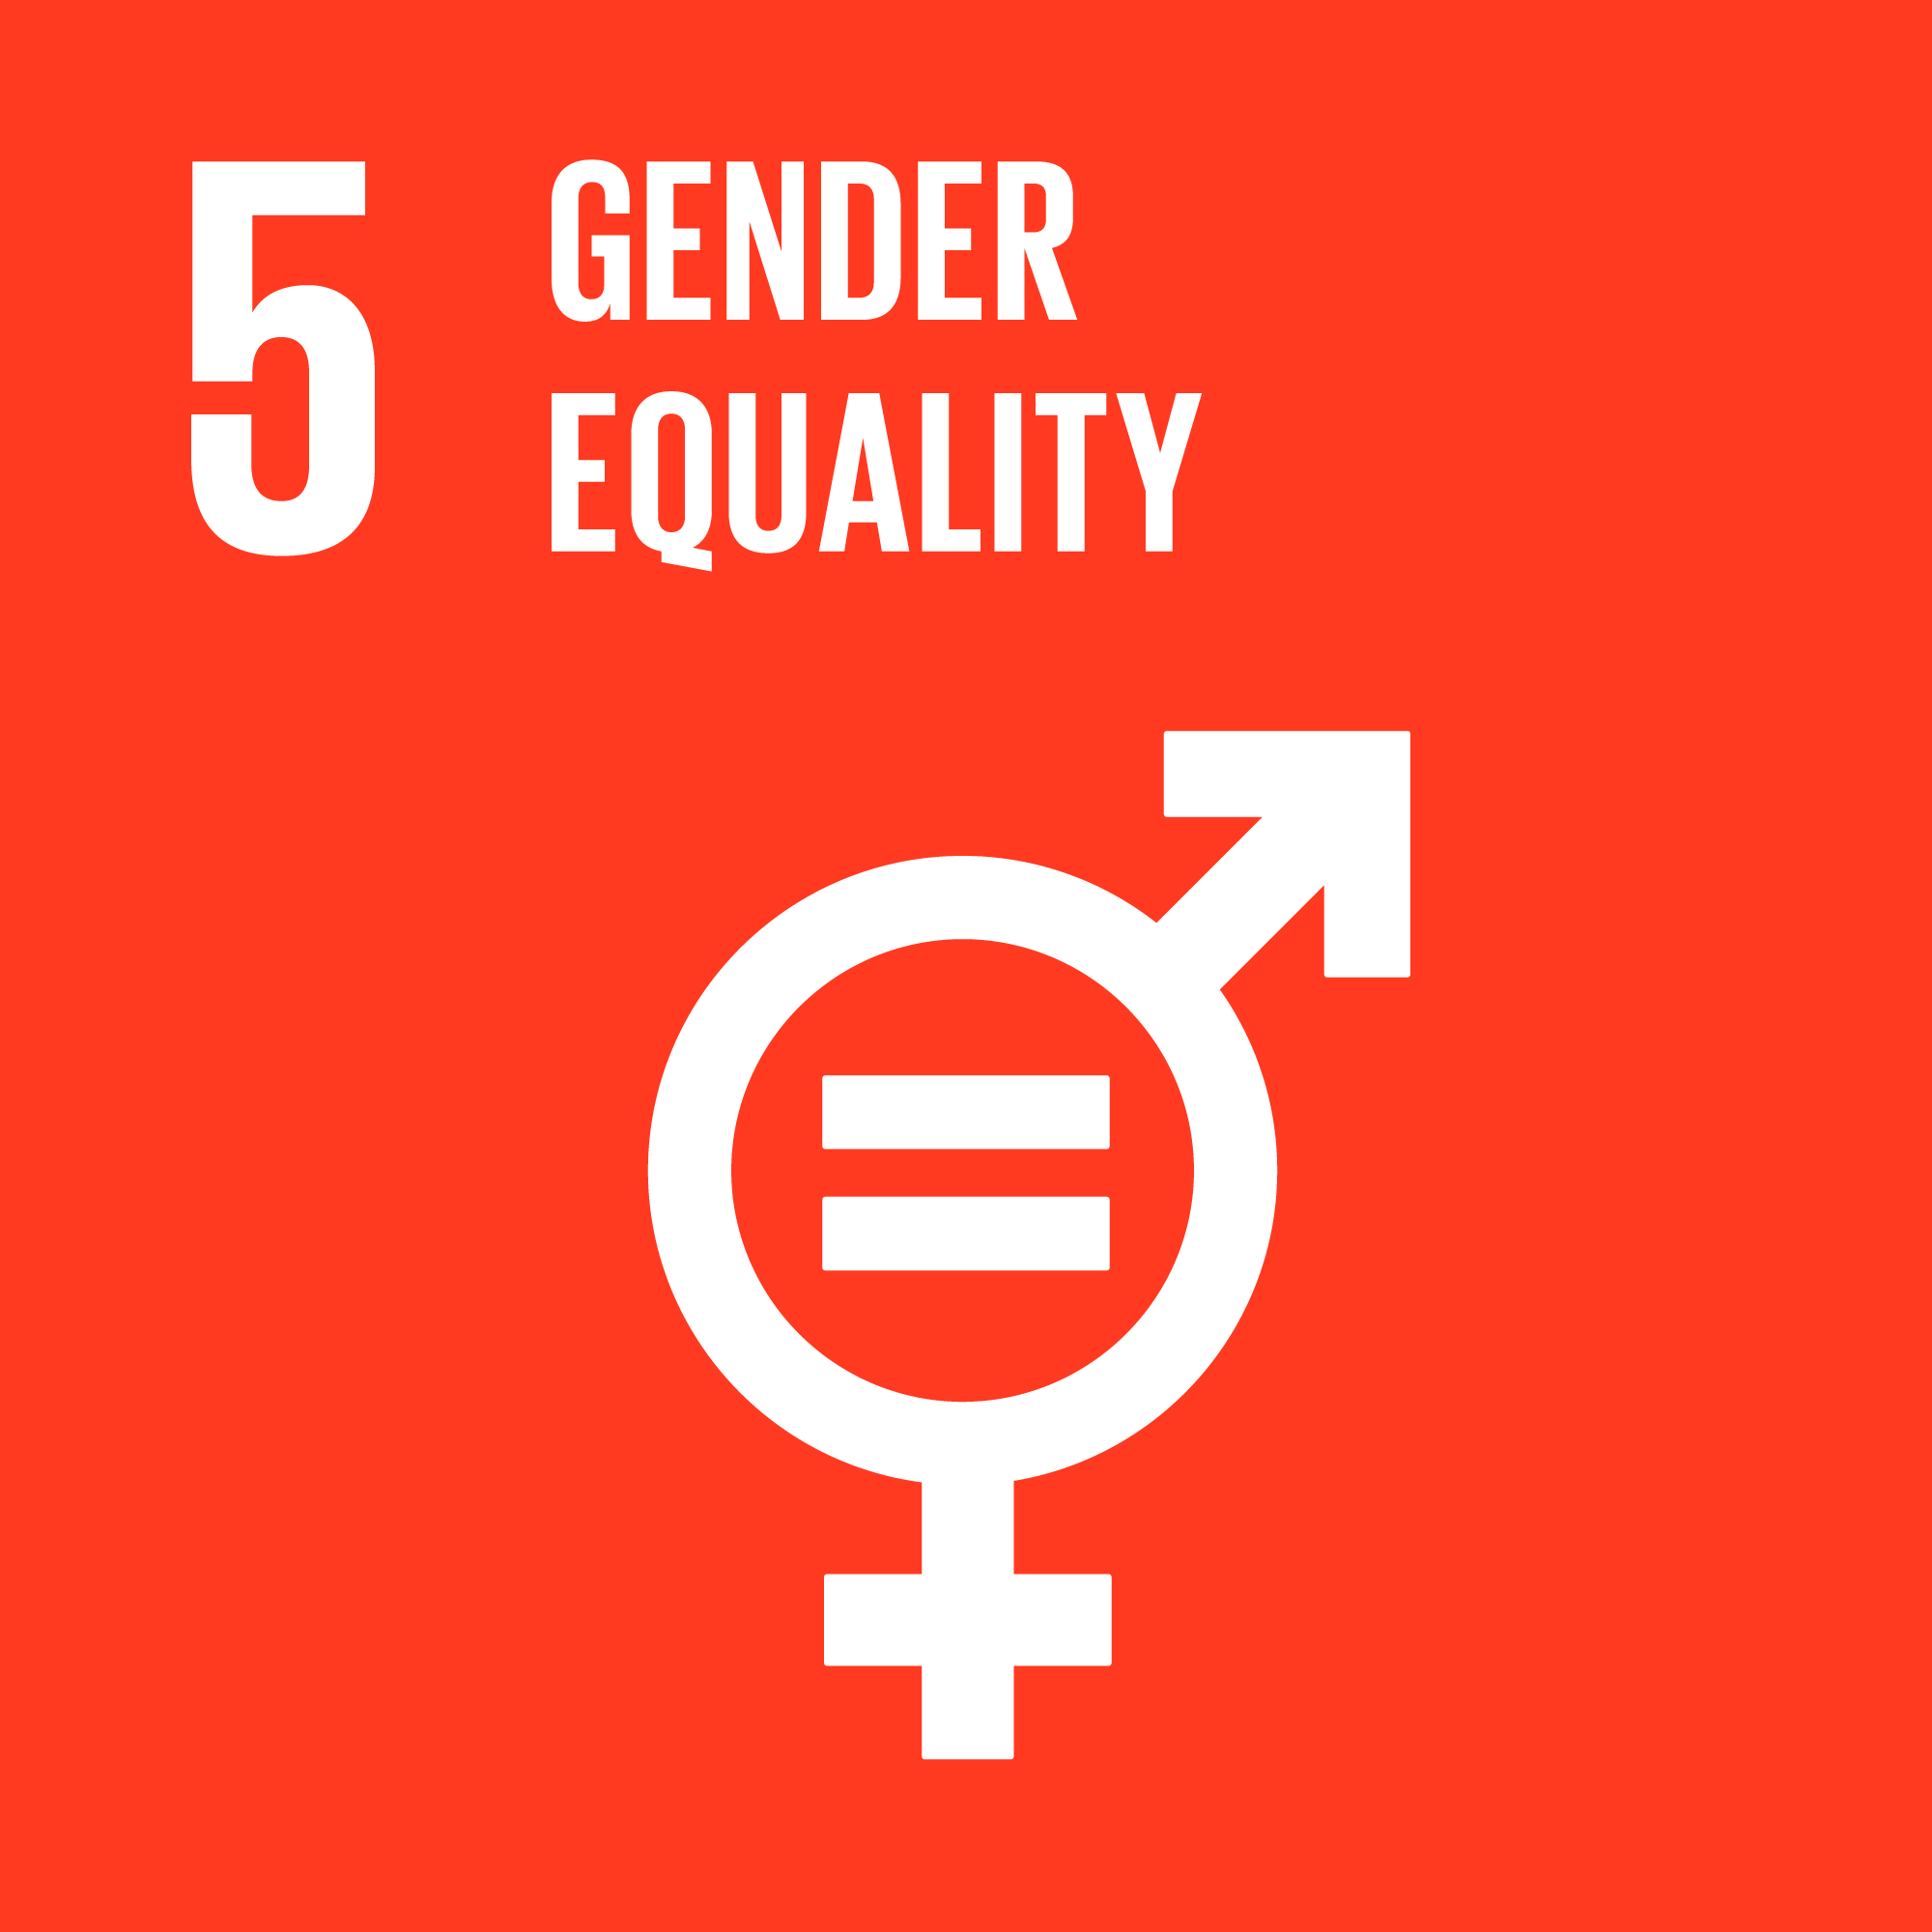 Sustainable Development Goal 5: Gender Equality